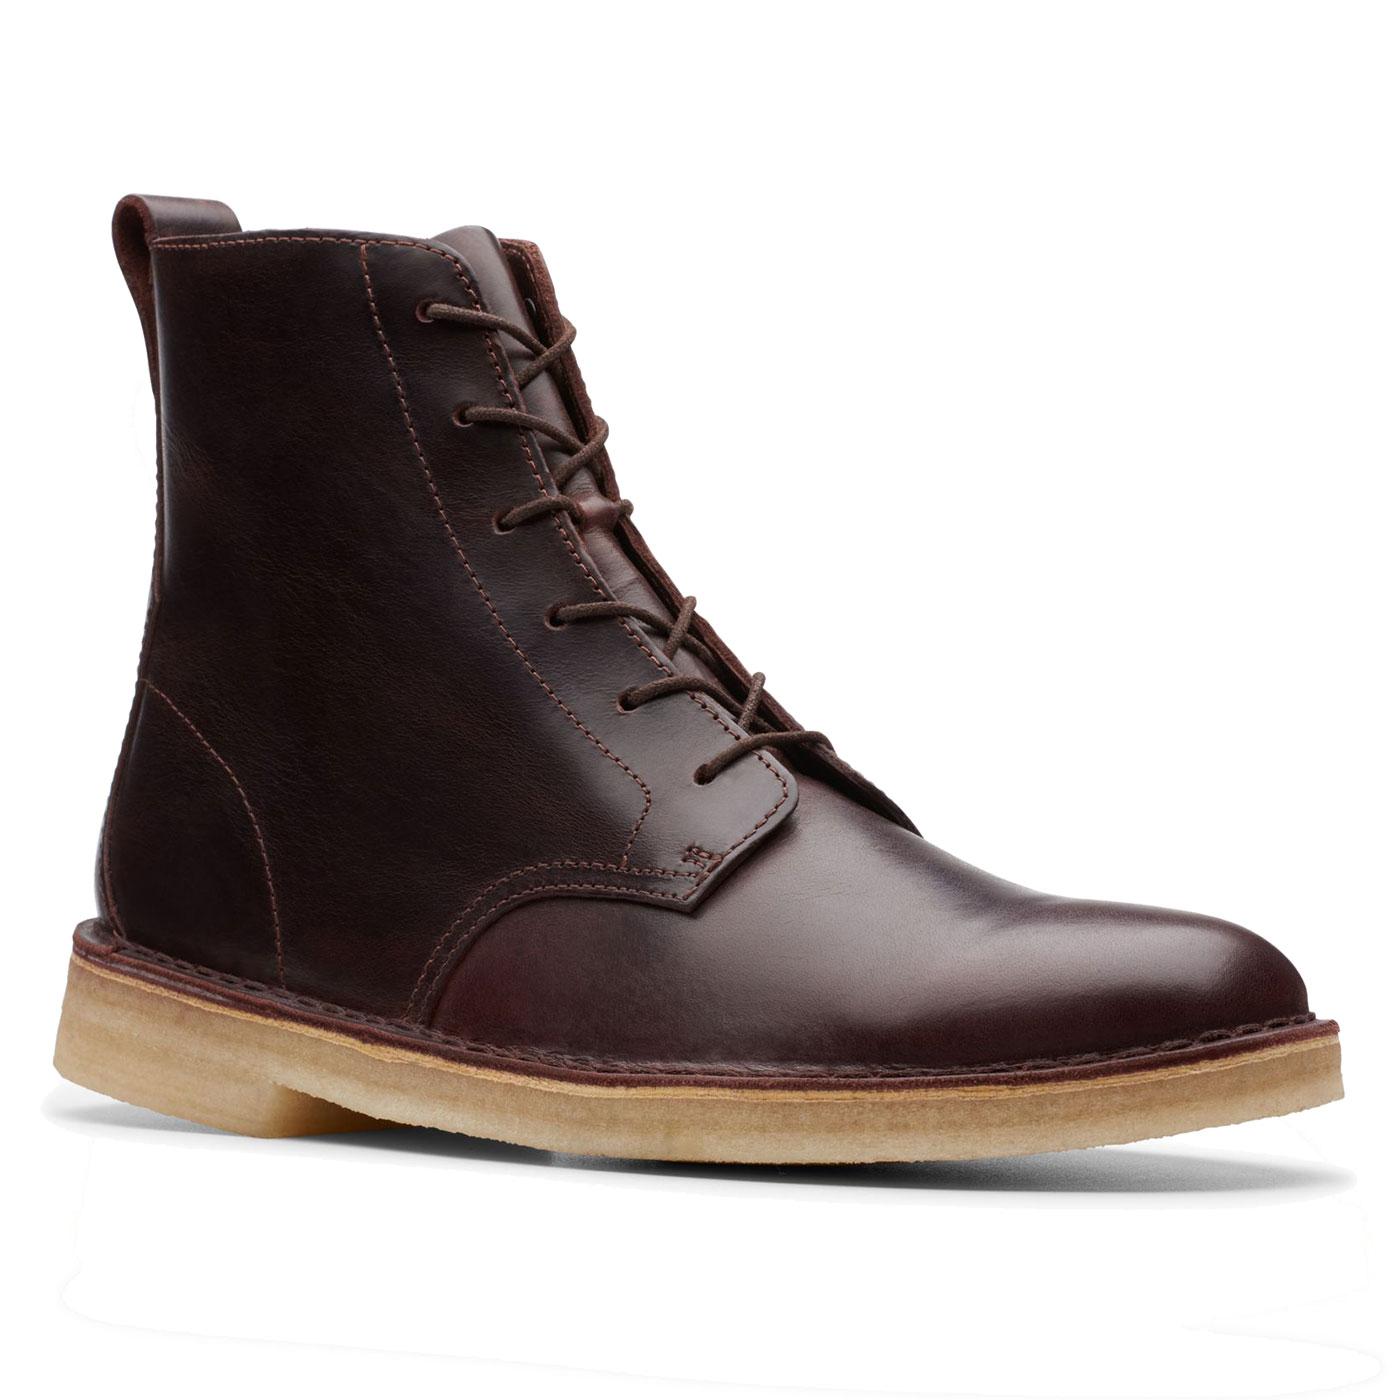 clarks chestnut leather boots